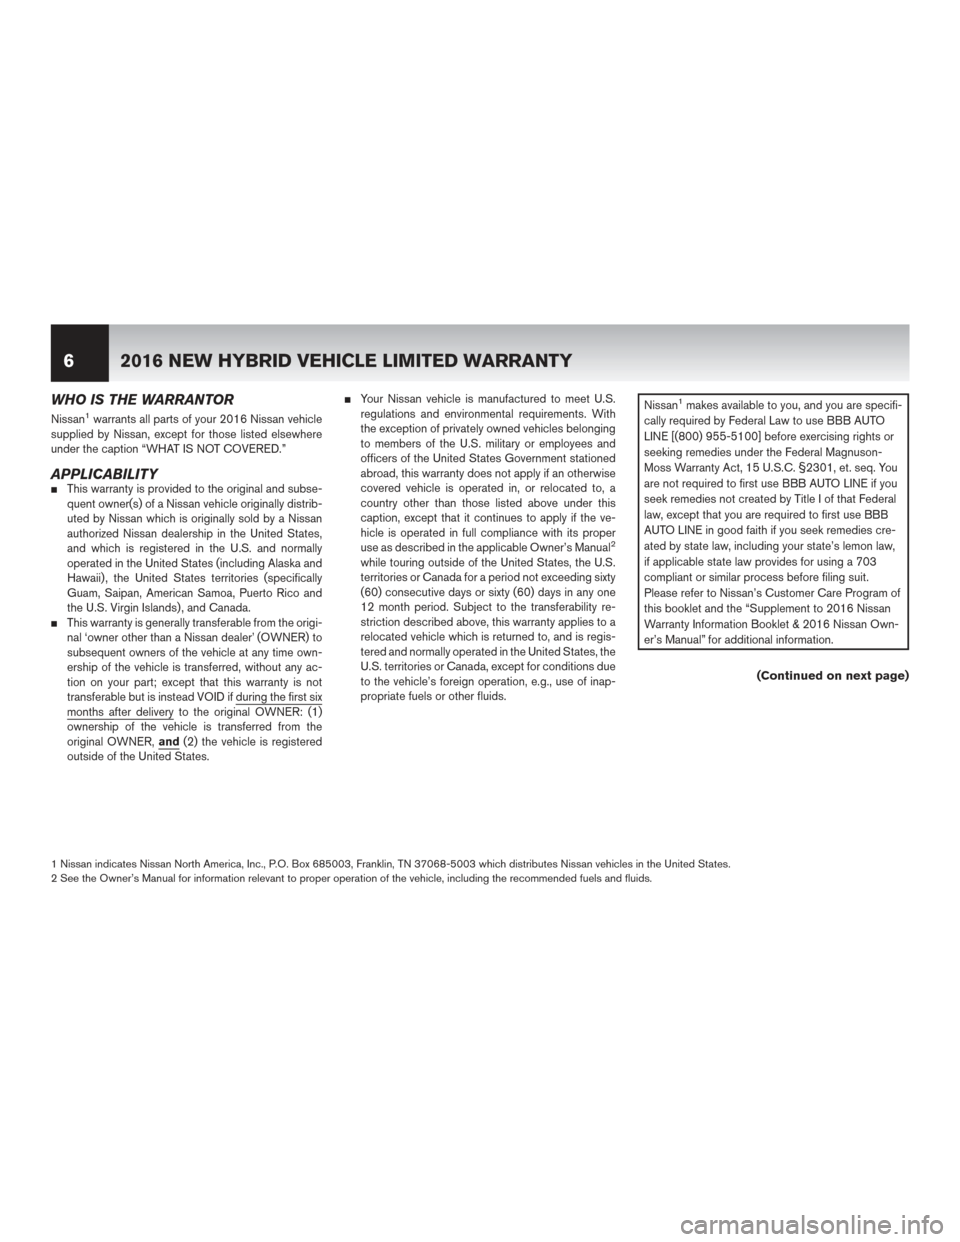 NISSAN MURANO HYBRID 2016 3.G Warranty Booklet WHO IS THE WARRANTOR
Nissan1warrants all parts of your 2016 Nissan vehicle
supplied by Nissan, except for those listed elsewhere
under the caption “WHAT IS NOT COVERED.”
APPLICABILITYThis warrant